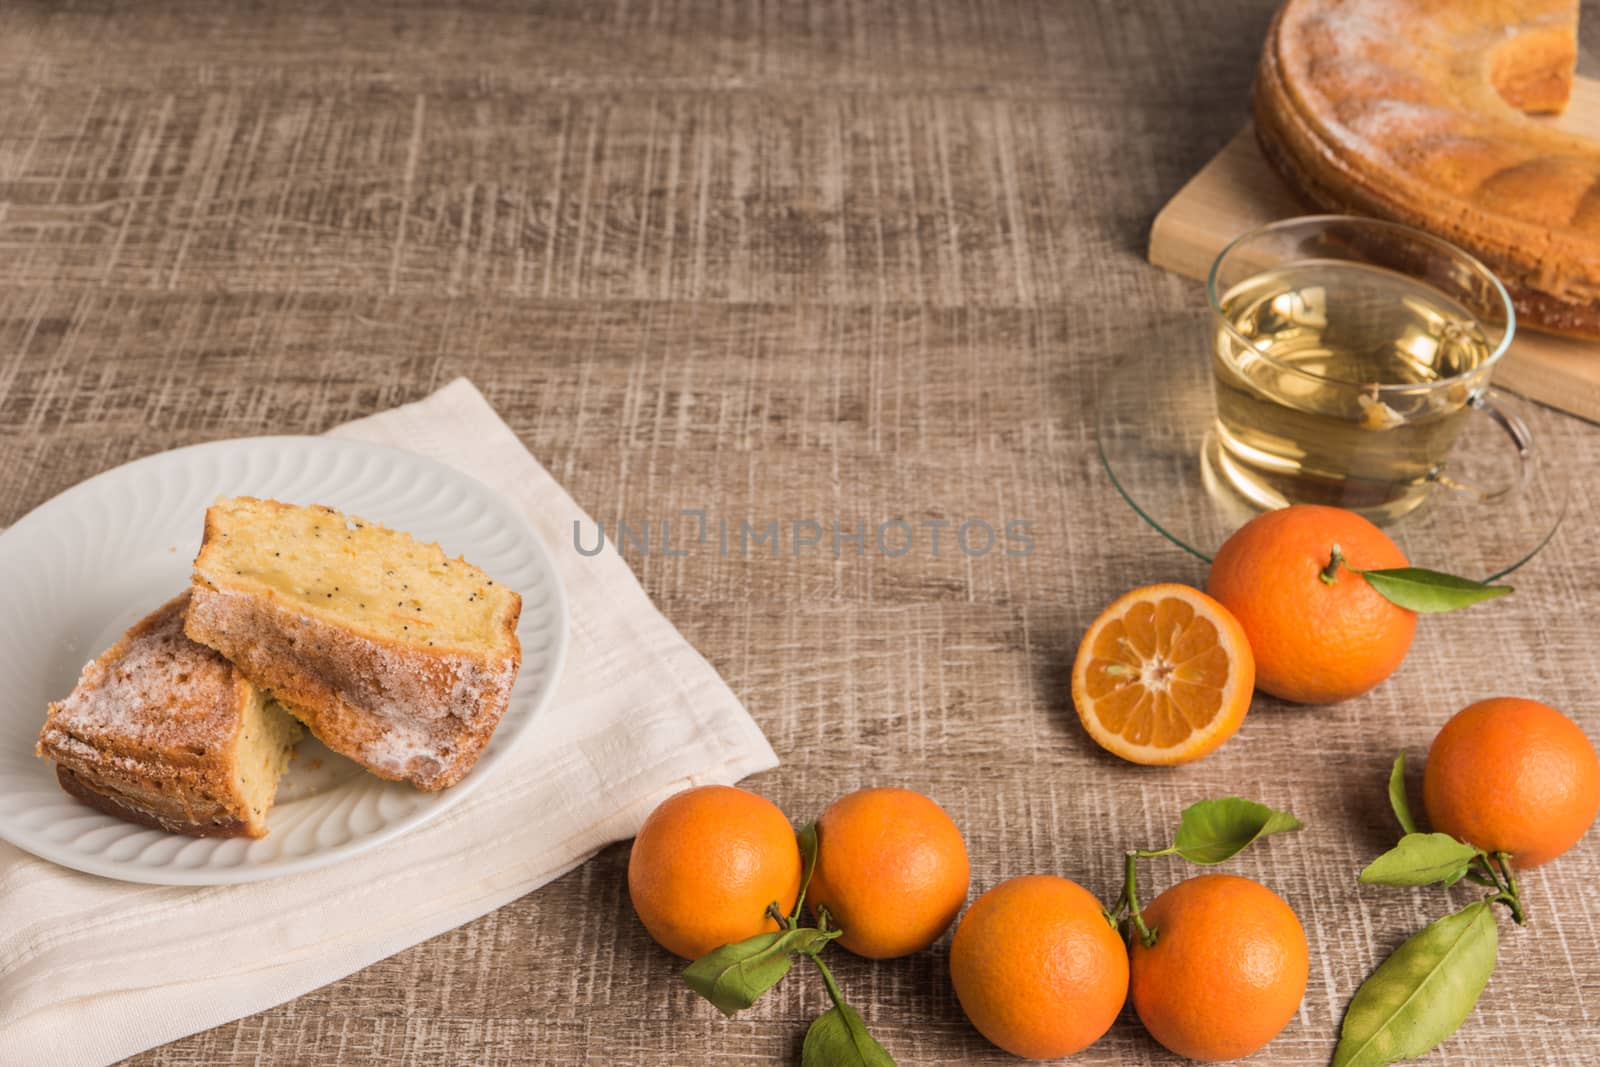 Slices of clementine cake with powdered sugar topping and cup of chamomile tea. Cake on a plate with fresh clementines on wooden board.